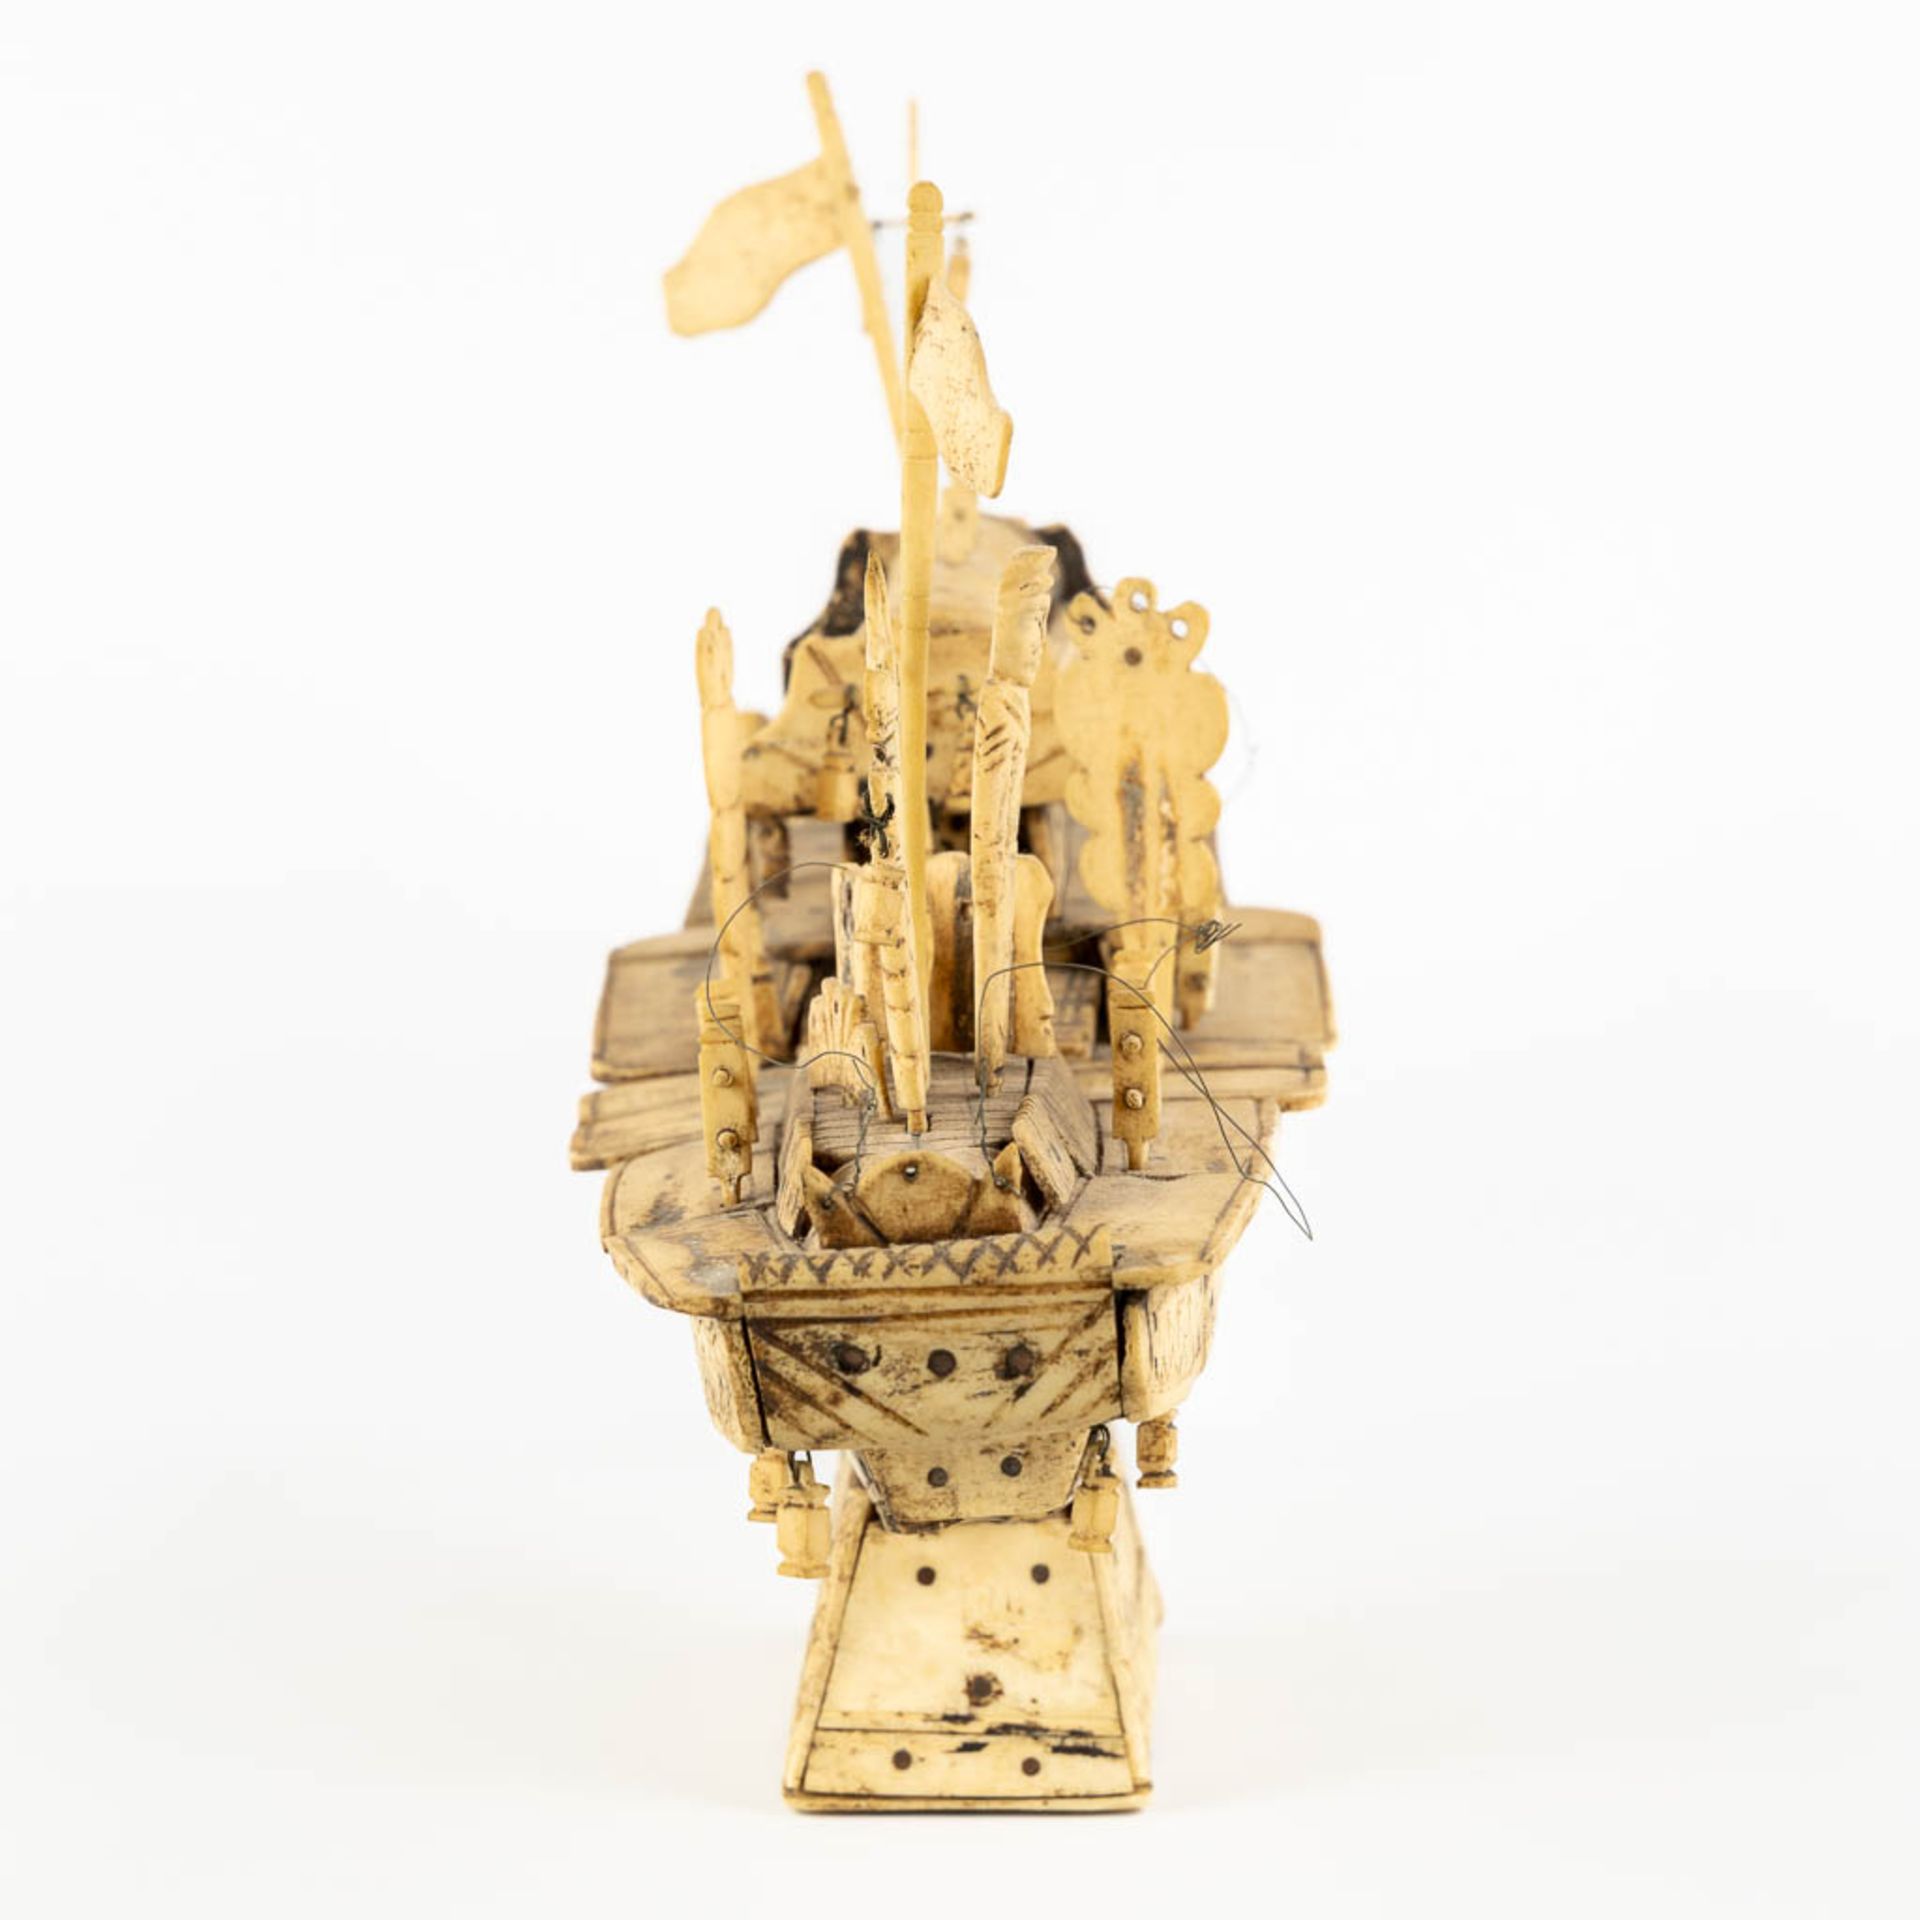 An antique Chinese model of a ship, sculptured bone. Circa 1900. (L:13 x W:50 x H:28 cm) - Image 6 of 11